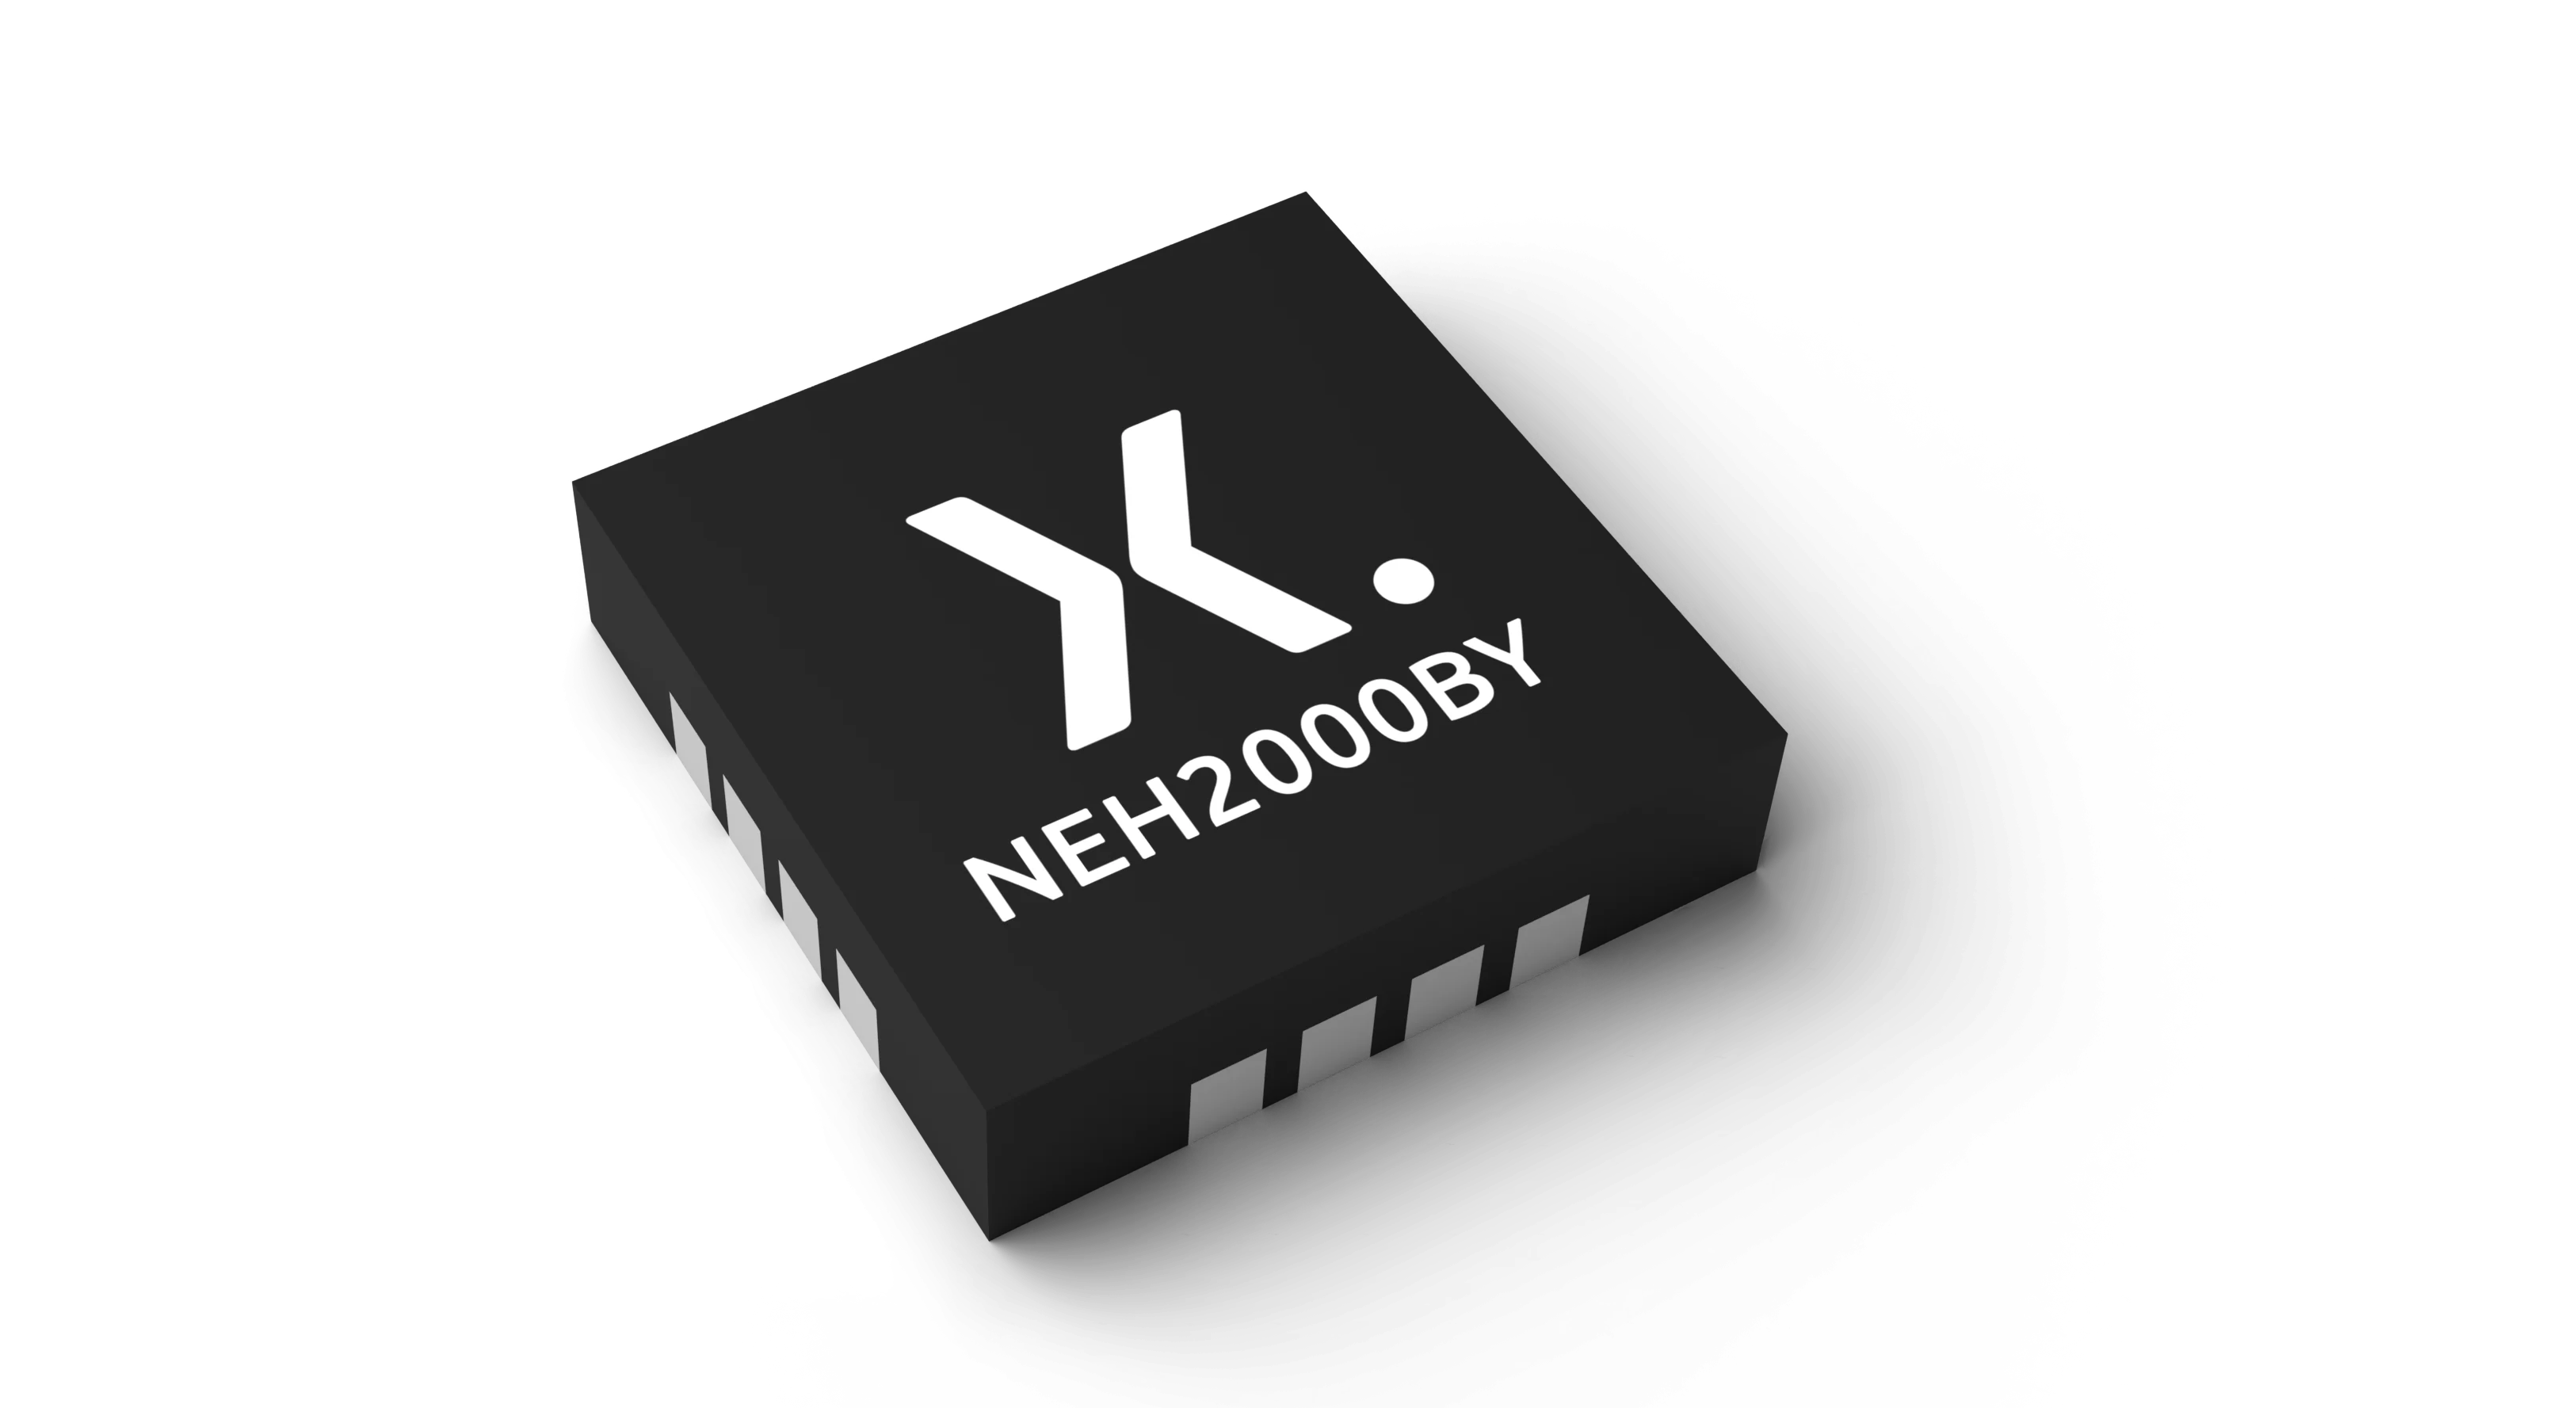 Energy harvesting PMIC from Nexperia includes MPPT tracking